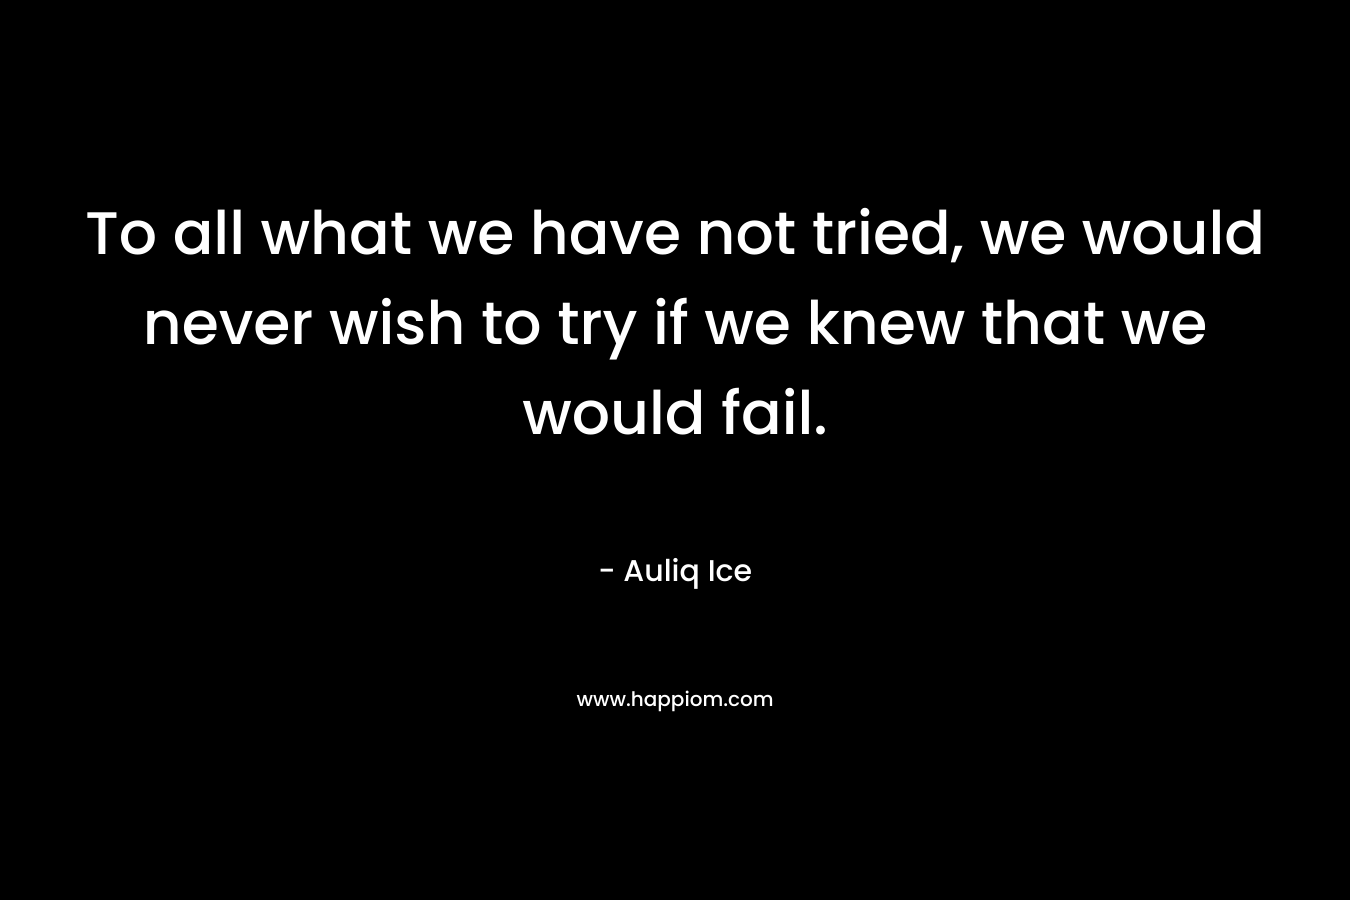 To all what we have not tried, we would never wish to try if we knew that we would fail.